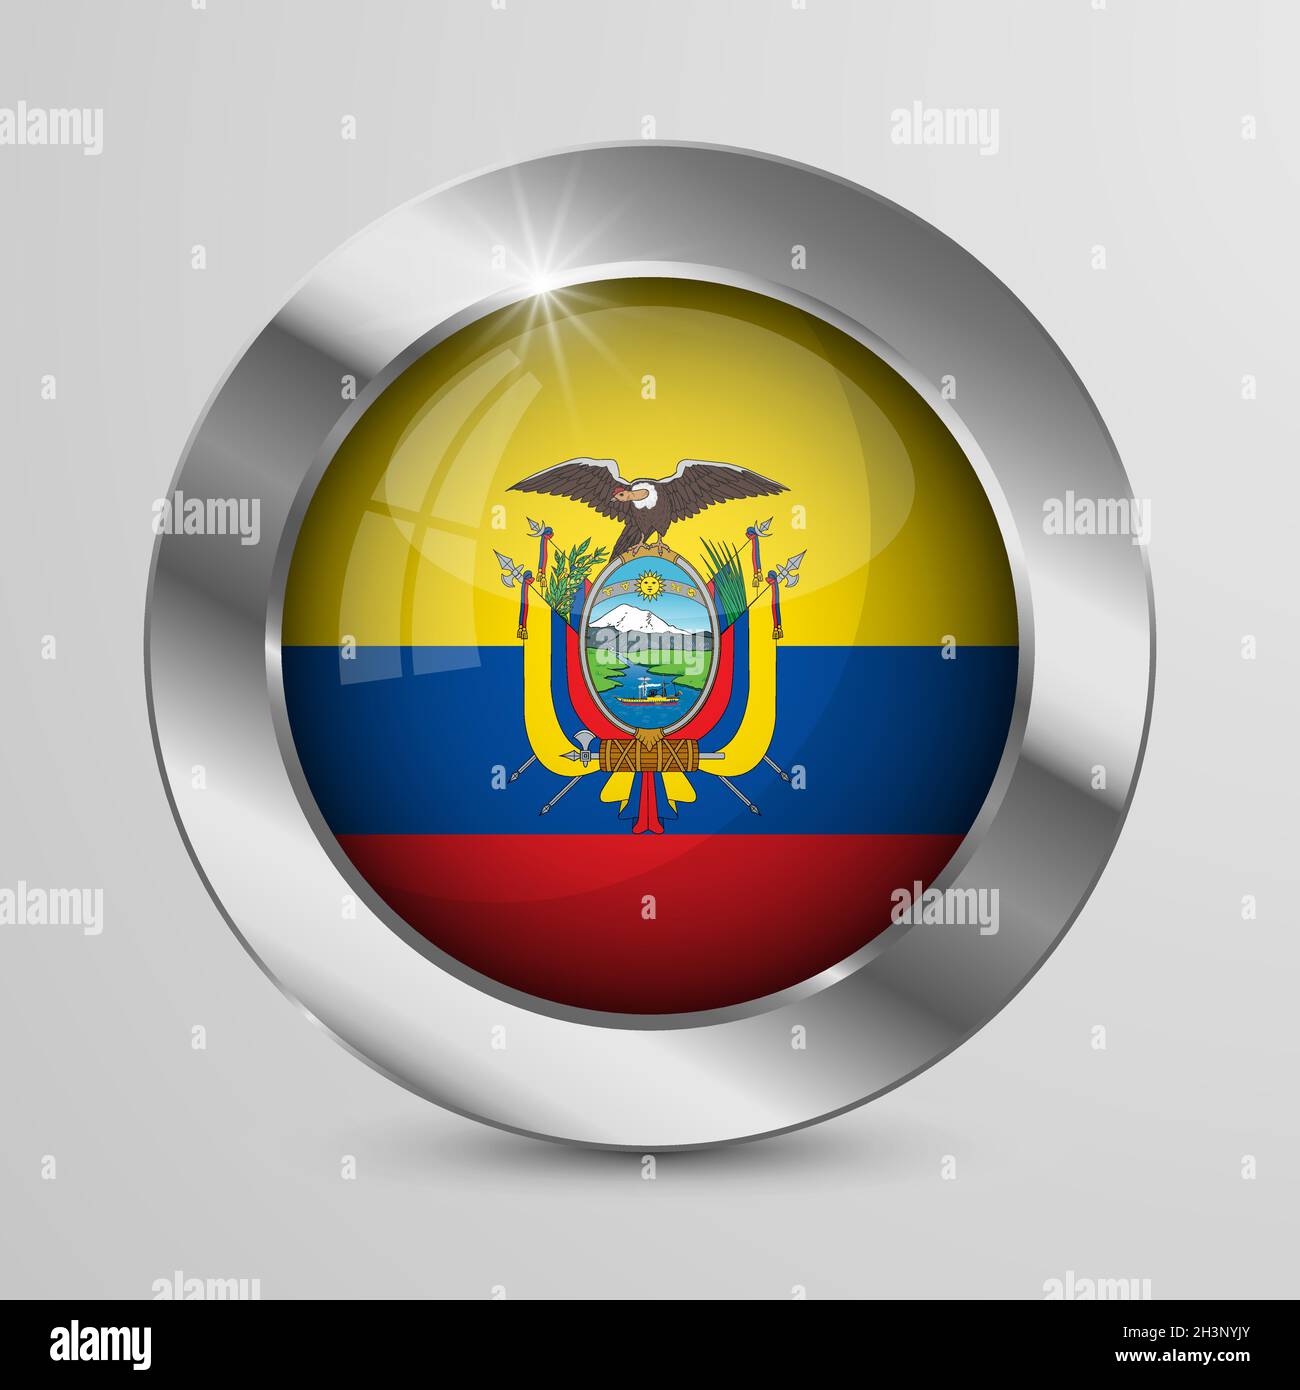 EPS10 Vector Patriotic Button with Ecuador flag colors. An element of impact for the use you want to make of it. Stock Vector